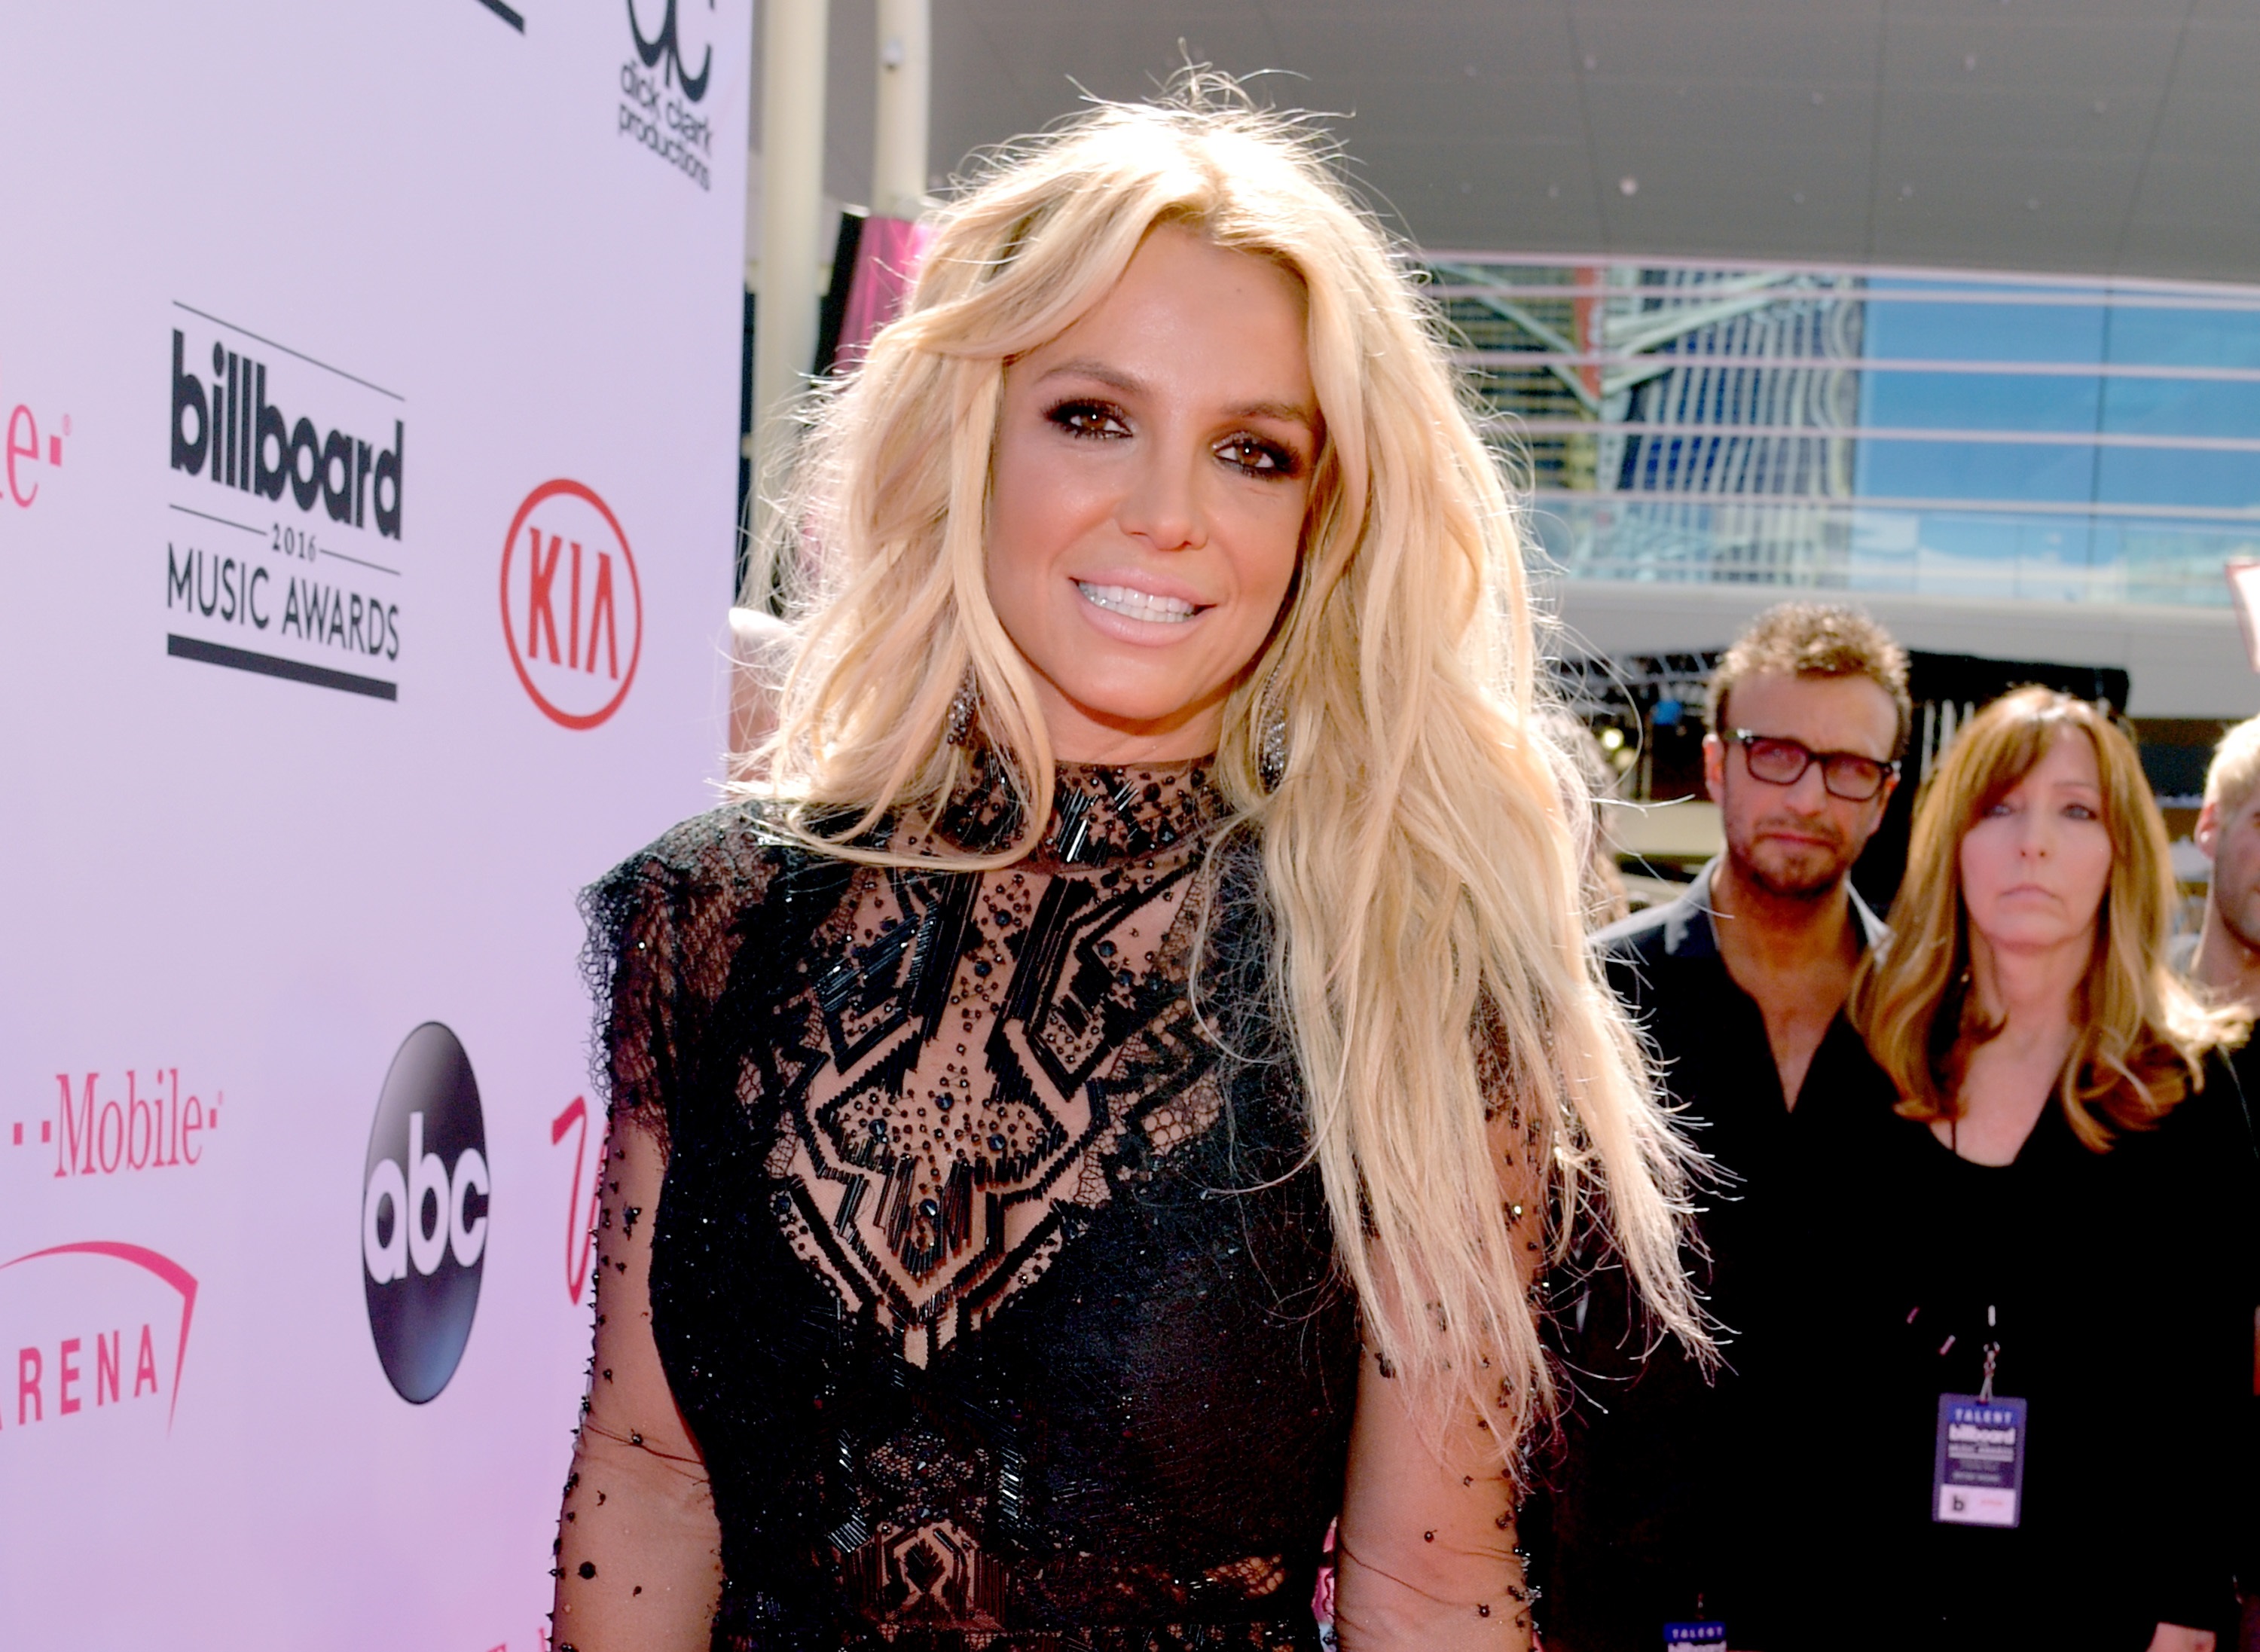 Britney Spears smiling for a photo in Las Vegas in 2016